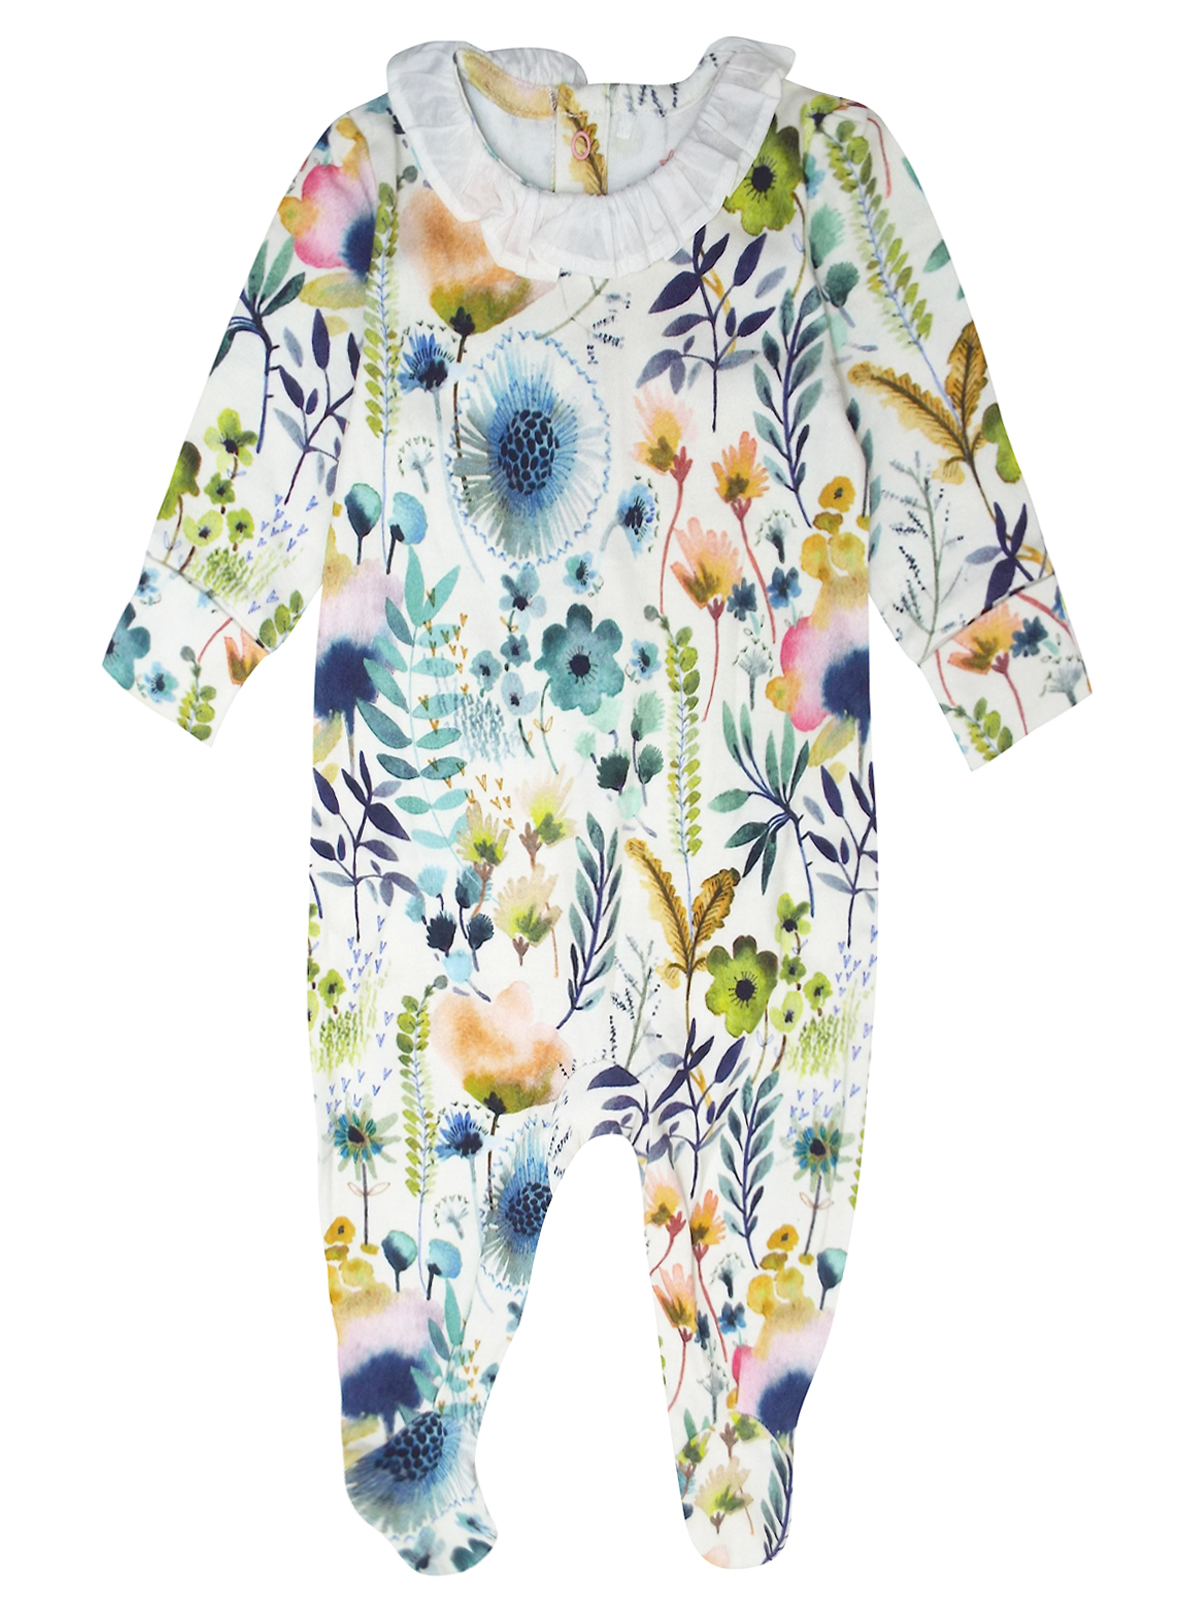 N3XT WHITE Baby Girls Floral Print Collared Sleepsuit - Size 3M to 6/9M